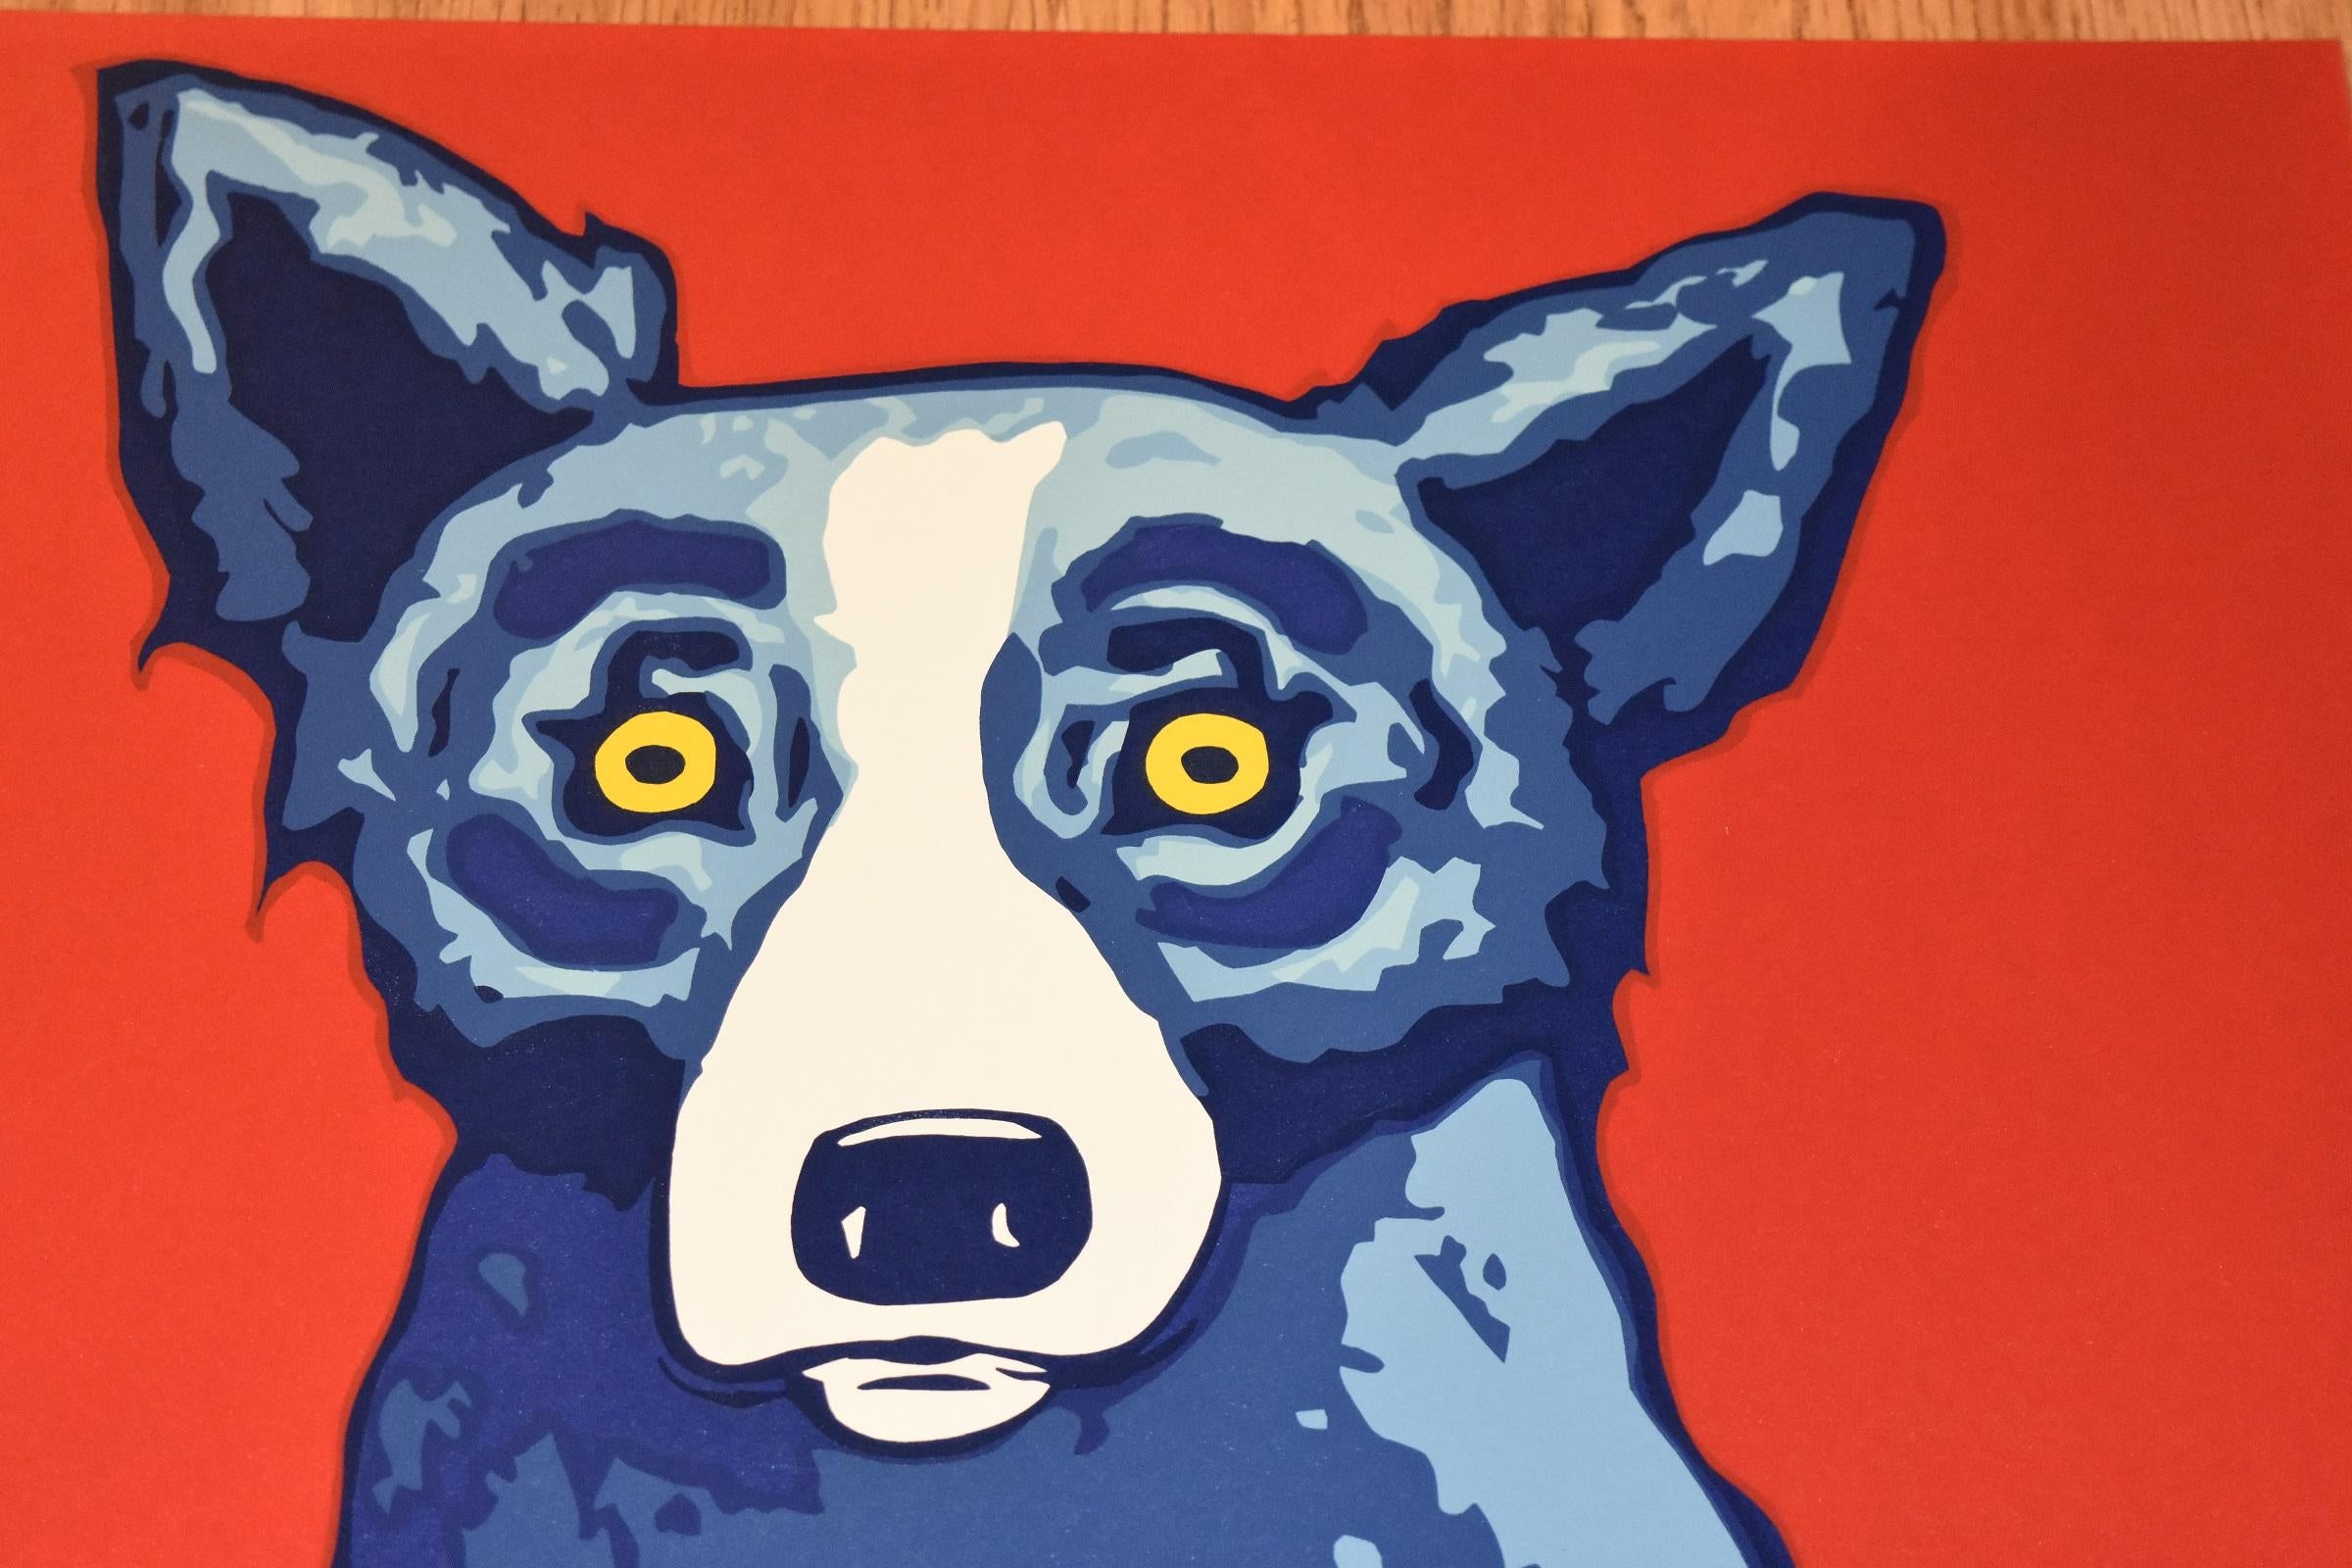 See How My Garden Grows - Signed Silkscreen Print Blue Dog - Red Animal Print by George Rodrigue